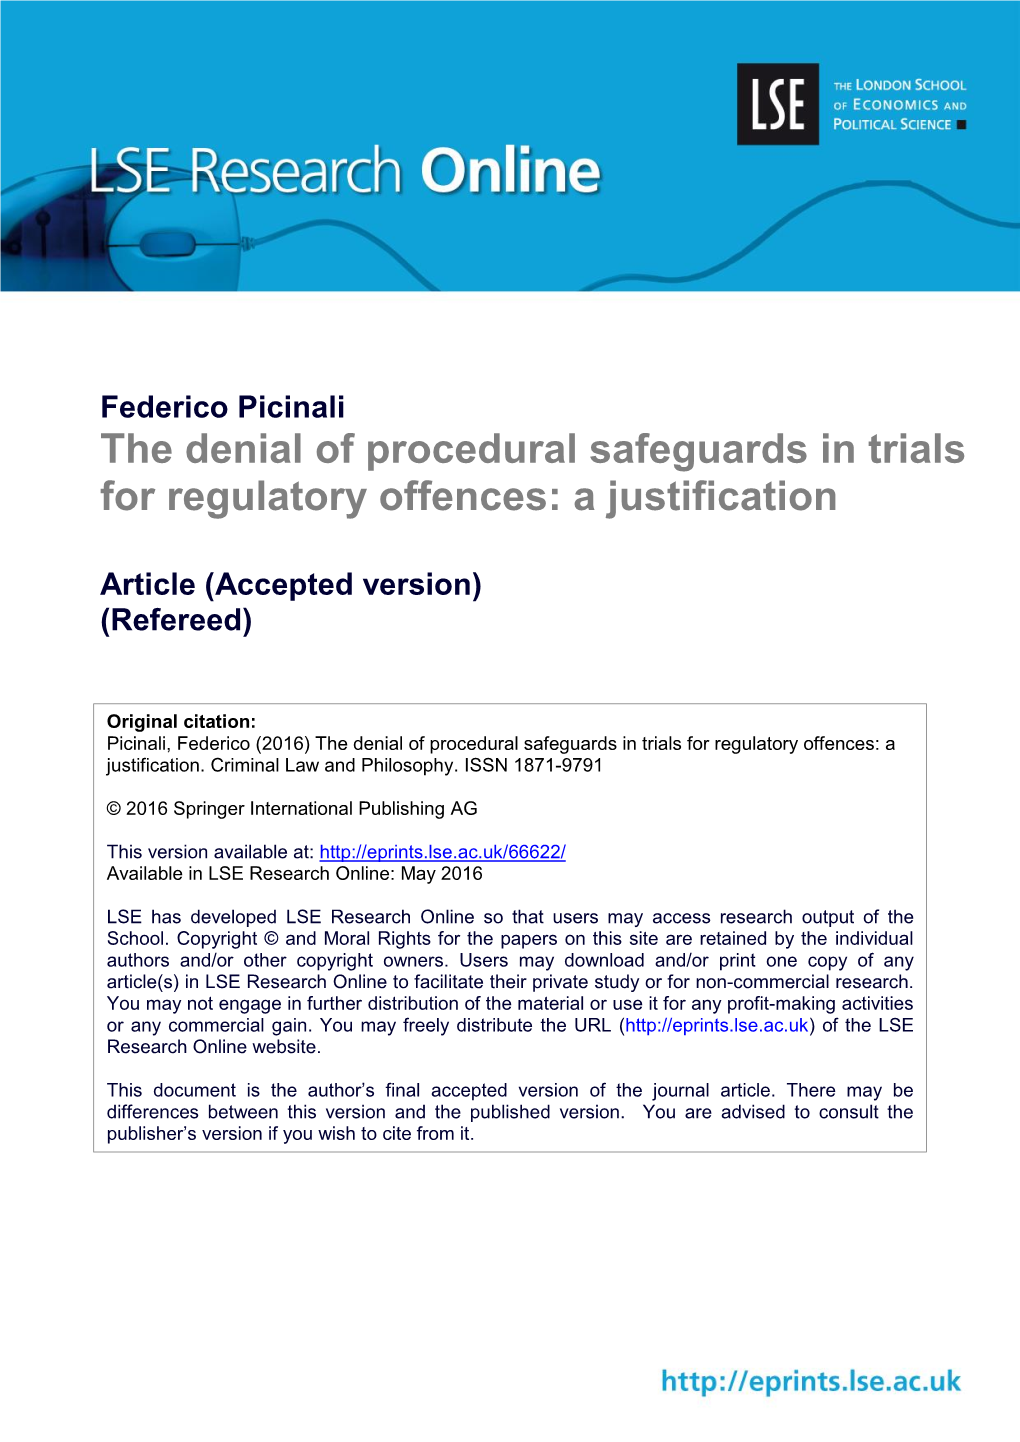 The Denial of Procedural Safeguards in Trials for Regulatory Offences: a Justification